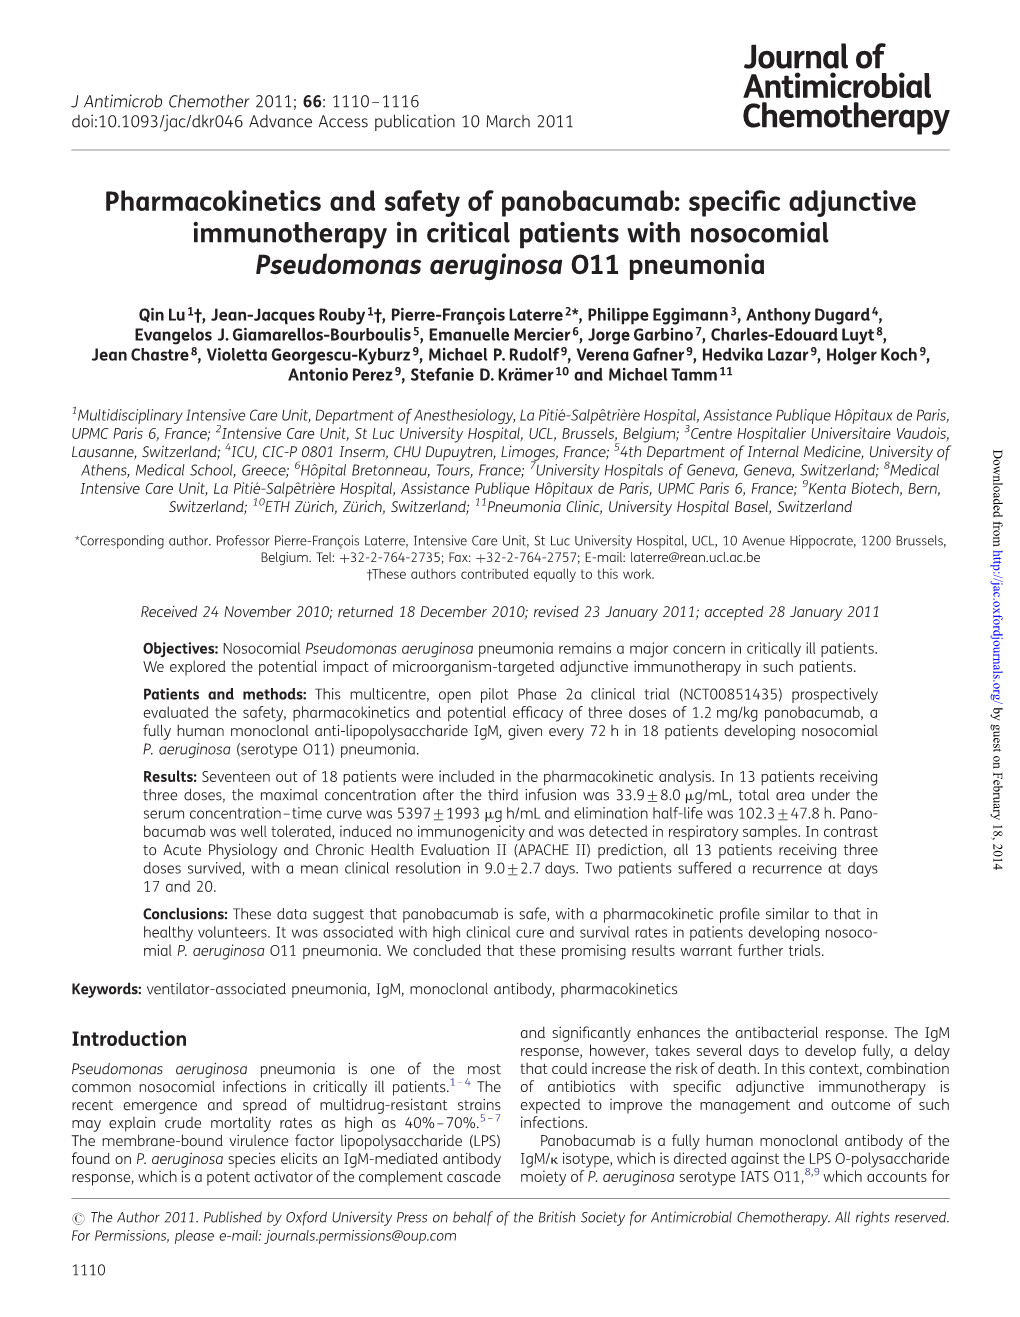 Pharmacokinetics and Safety of Panobacumab: Speciﬁc Adjunctive Immunotherapy in Critical Patients with Nosocomial Pseudomonas Aeruginosa O11 Pneumonia